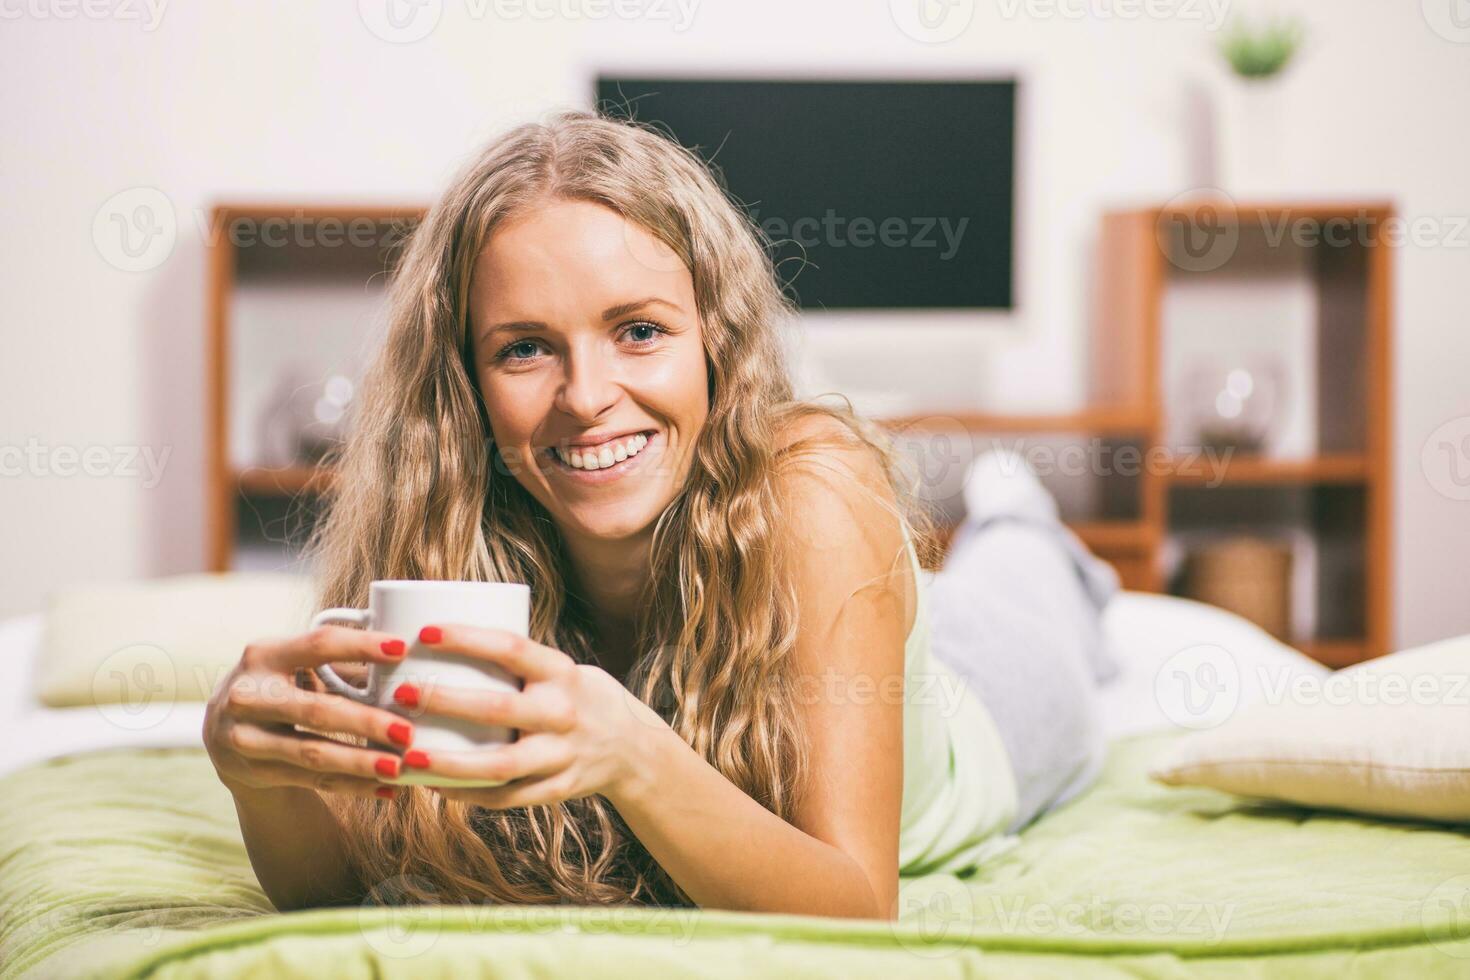 A woman in her bedroom photo